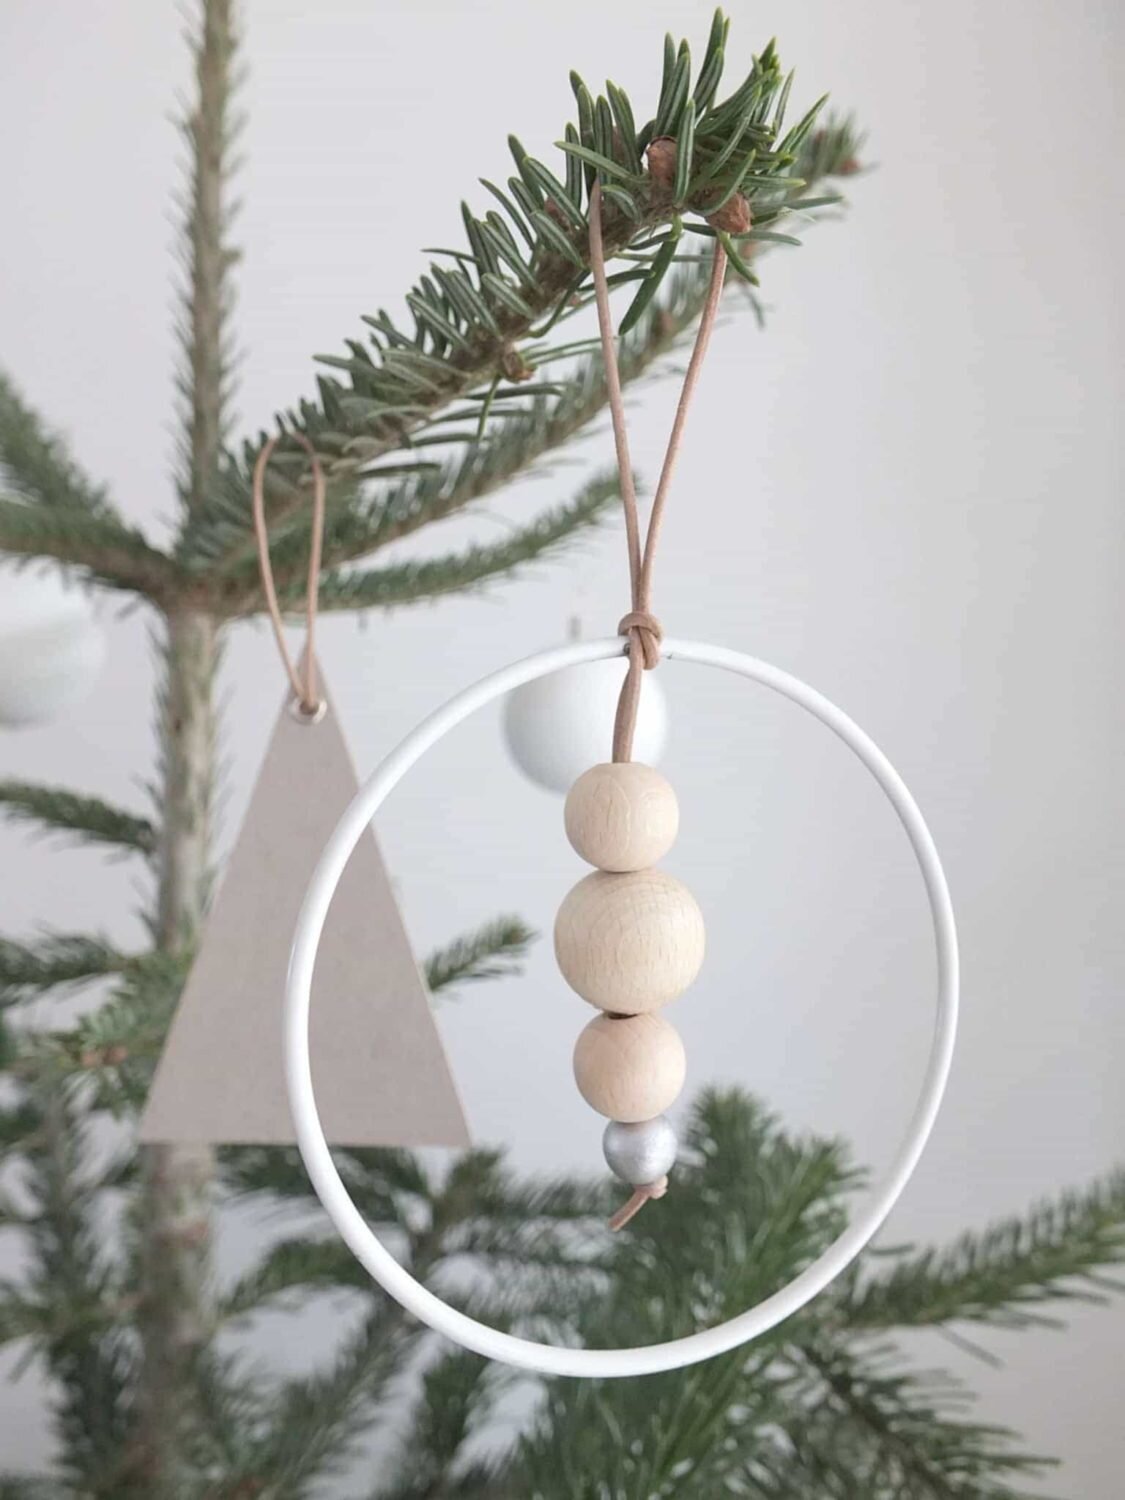 ornament with a white hoop, light wood beads, and a silver bead